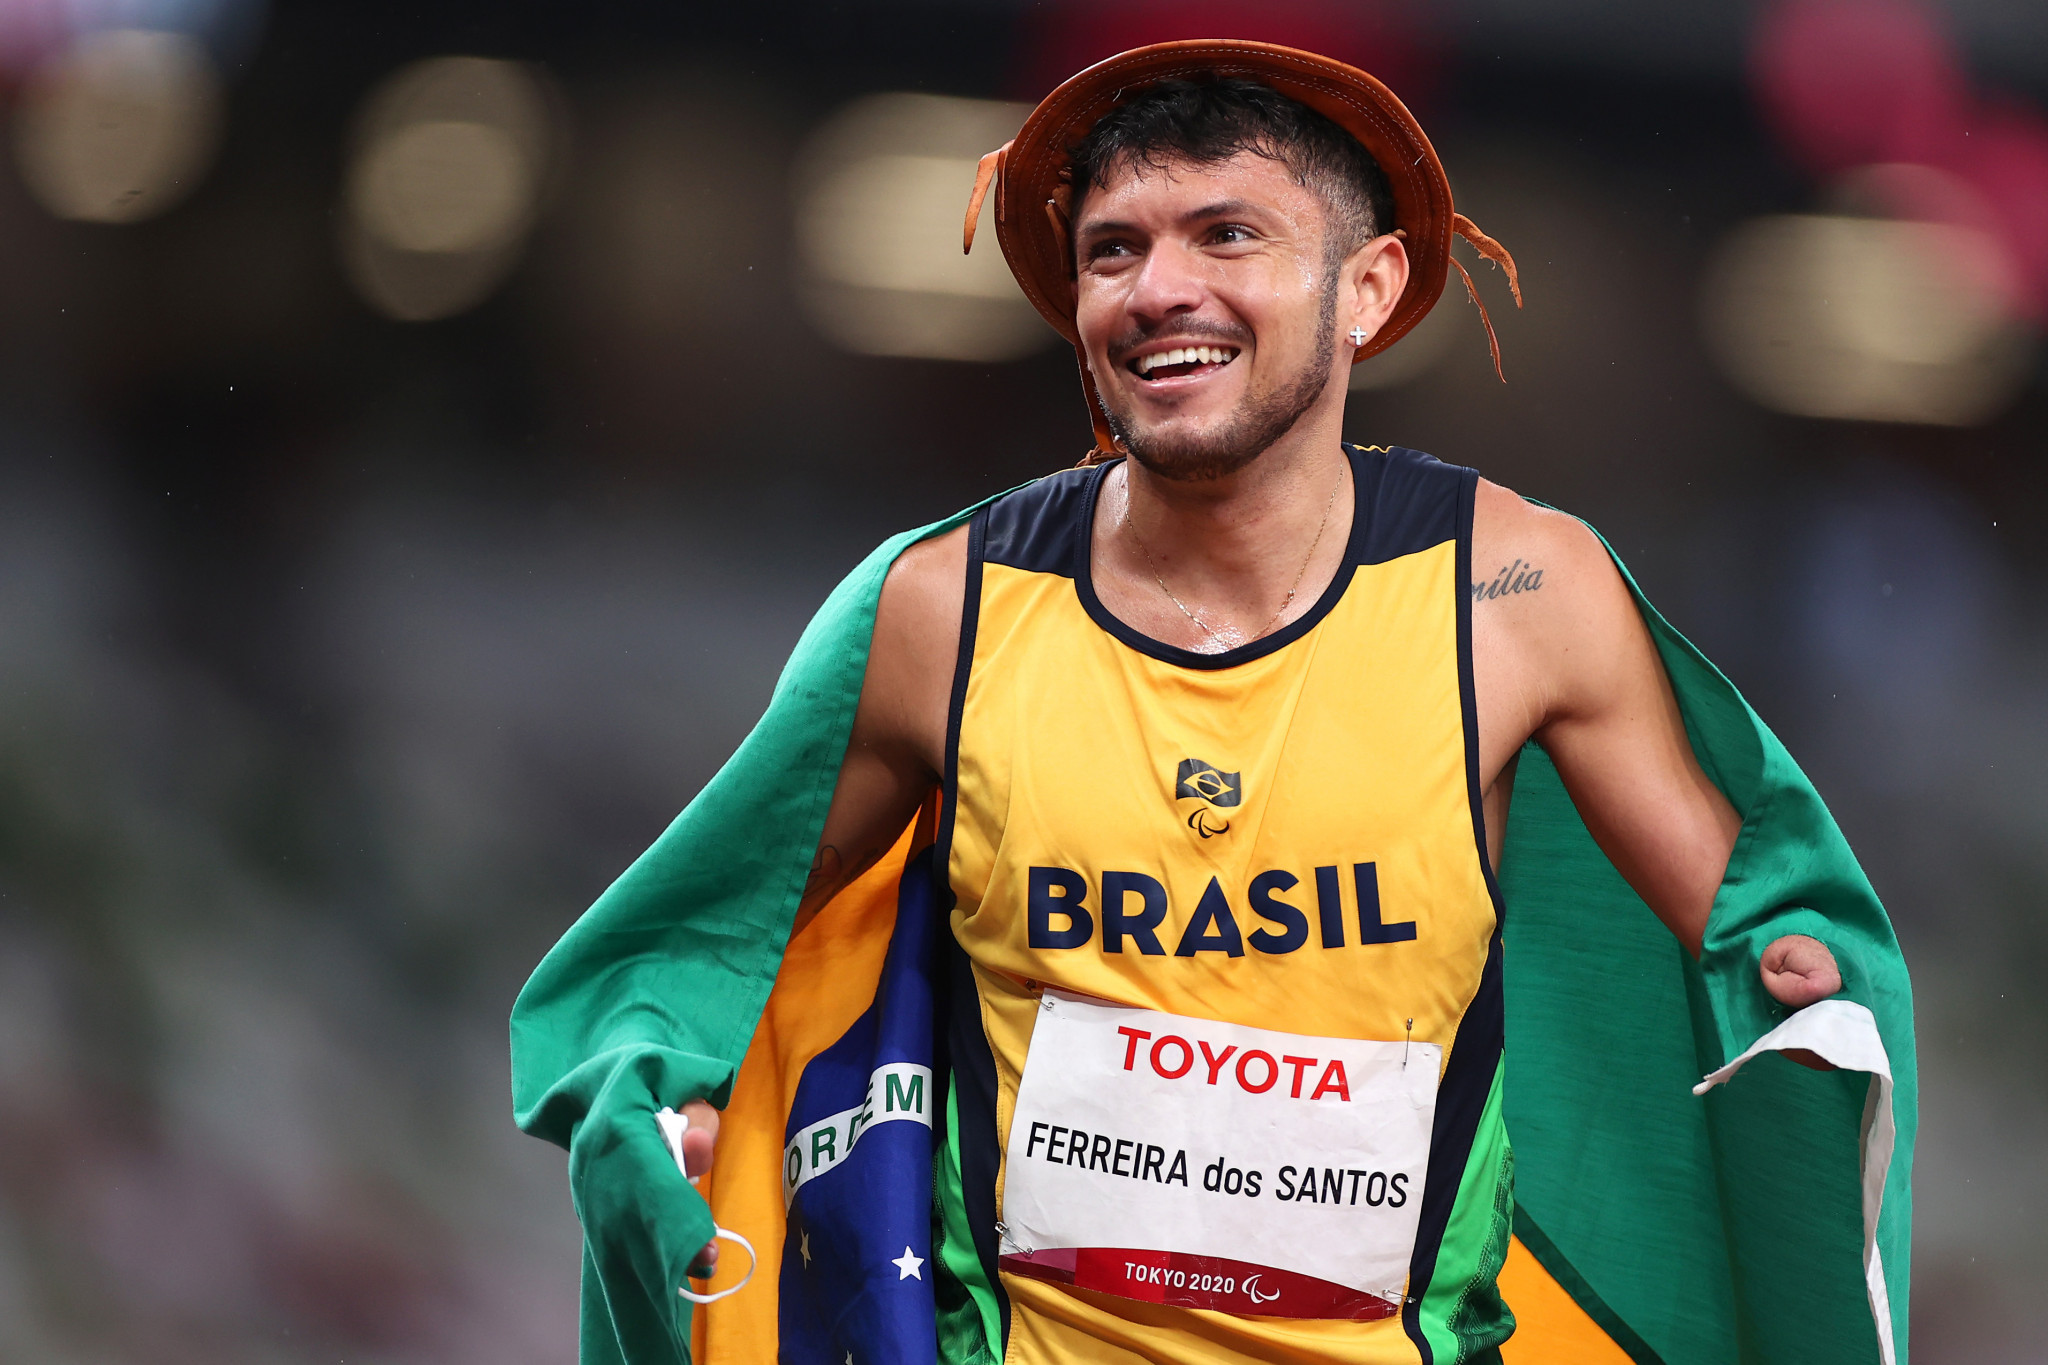 Paralympic champion Ferreira dos Santos breaks two world records at Brazilian Athletics Challenge event